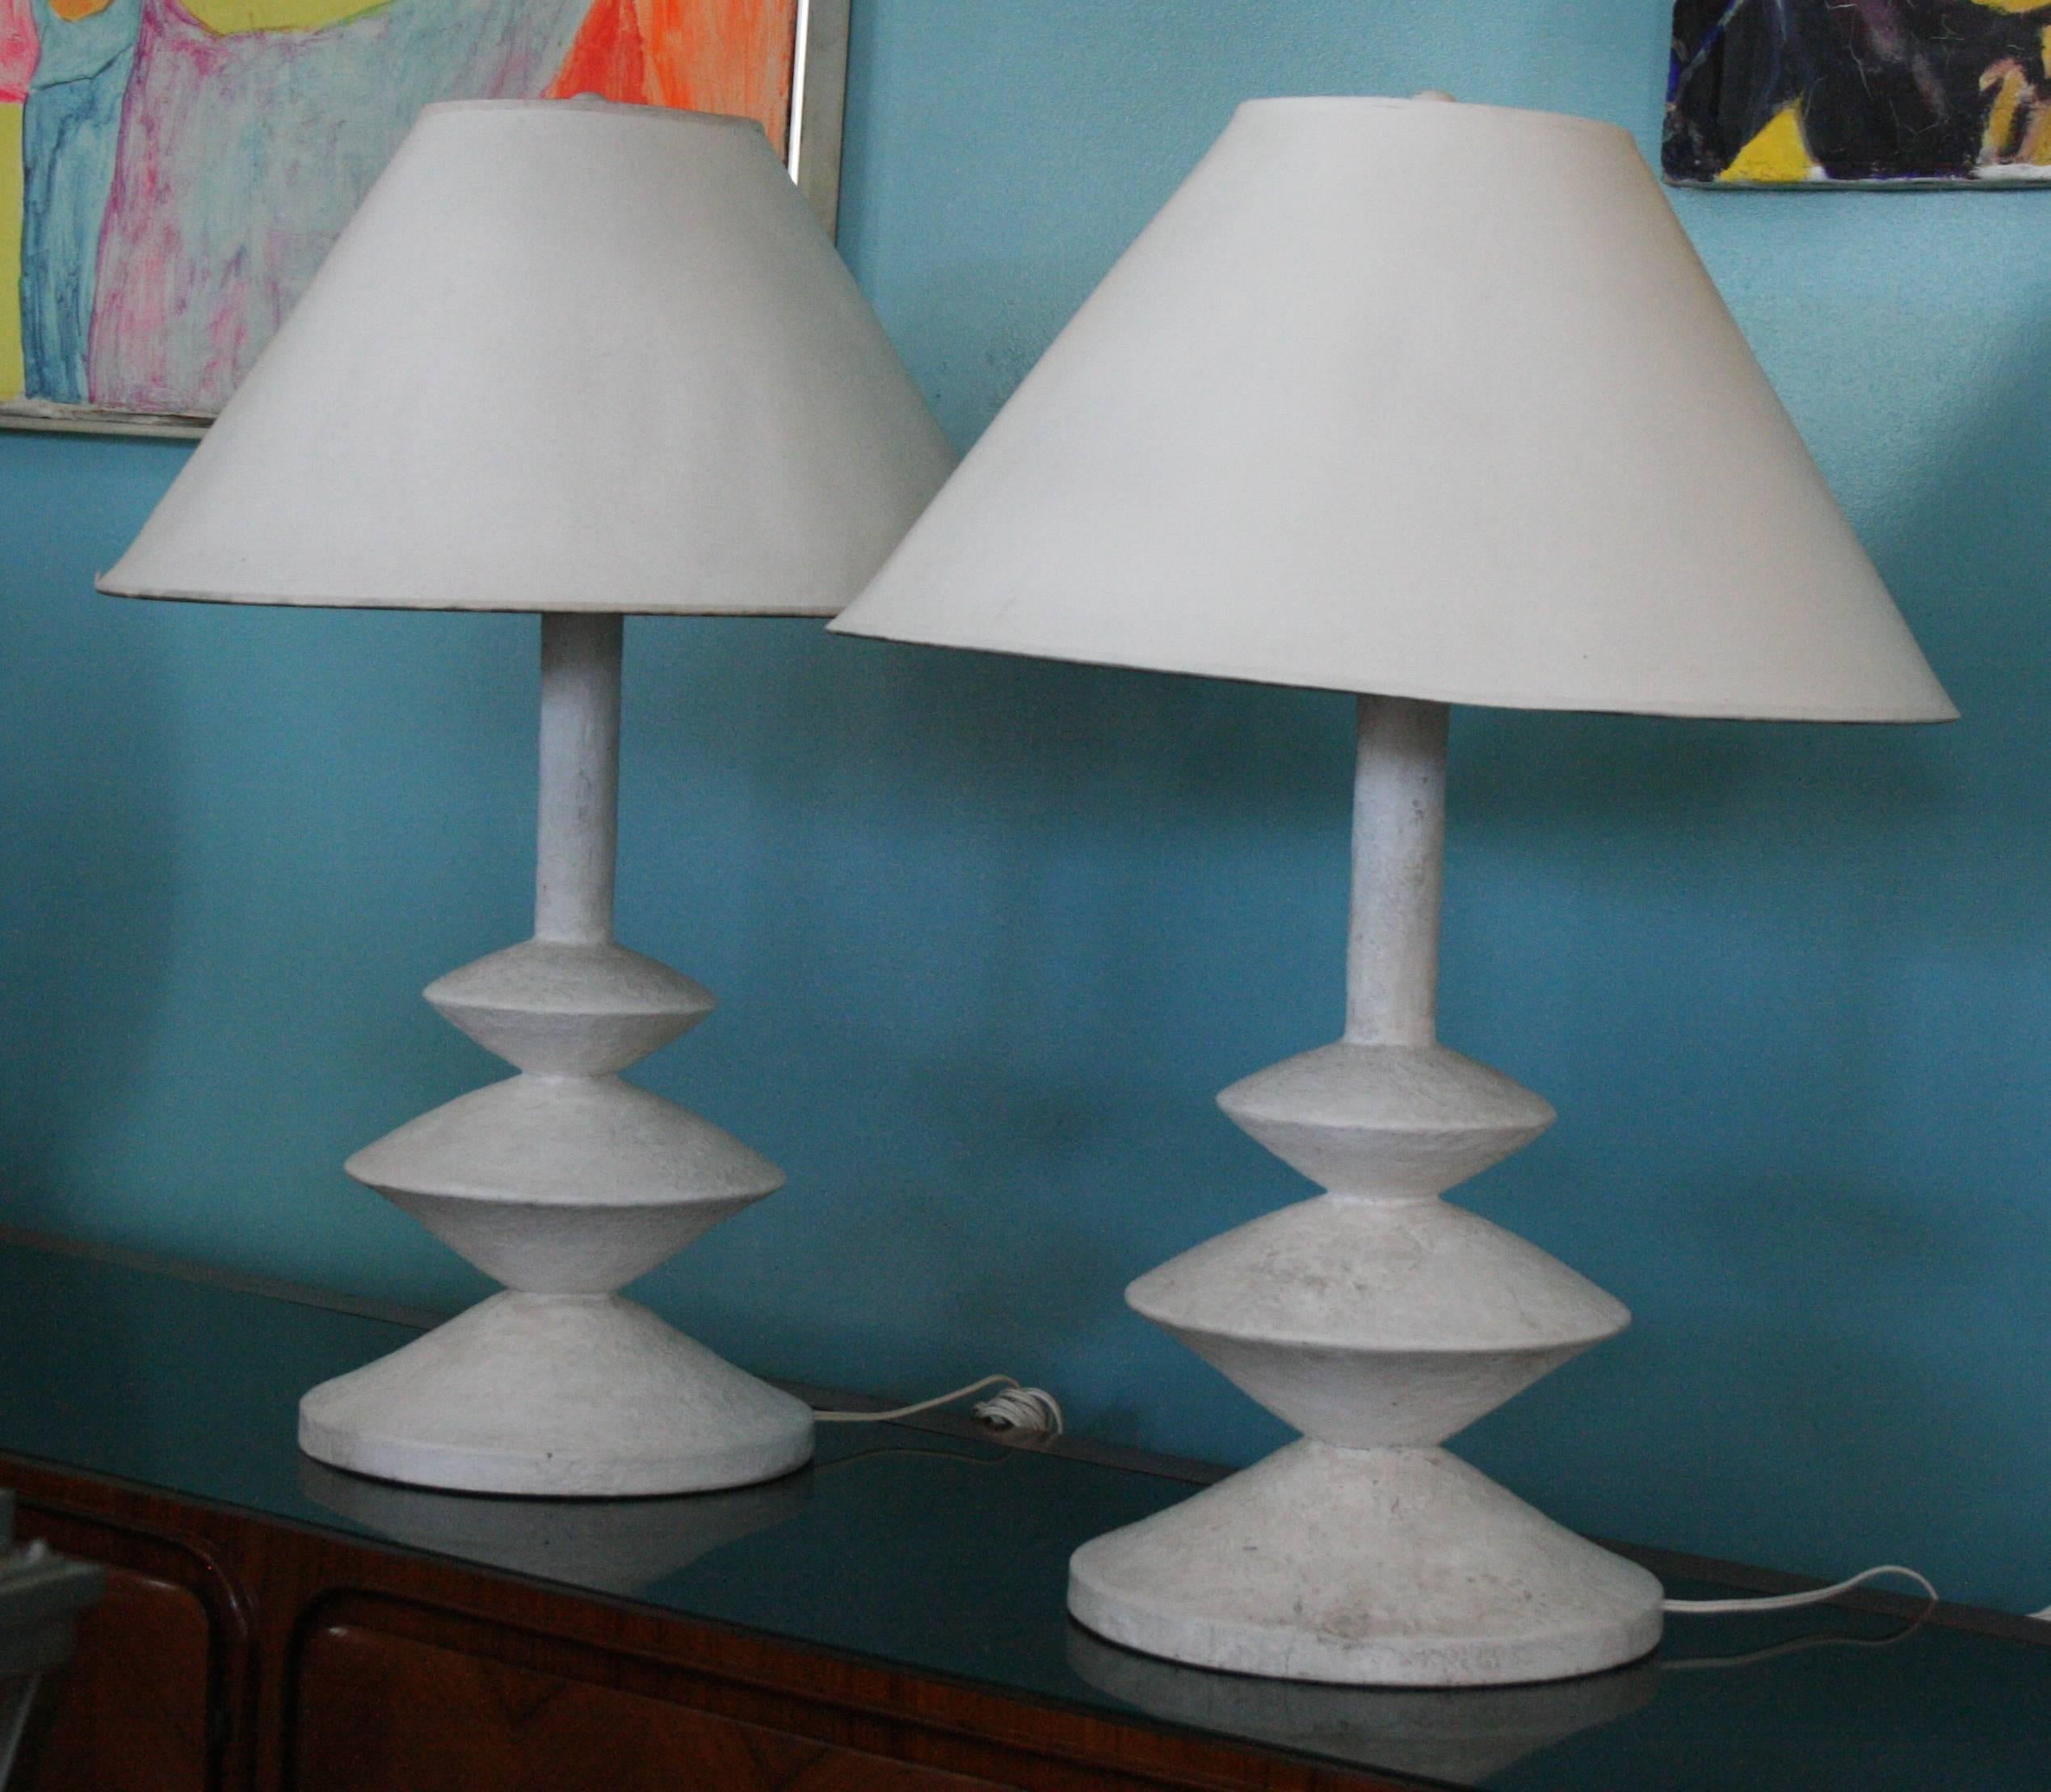 An iconic 20th century French design, pair of lamps originally designed by Giacometti for Jean Michel Frank, later produced by Grange for Yves Saint Laurent, these are early with a wonderful aged patina but difficult to document as original